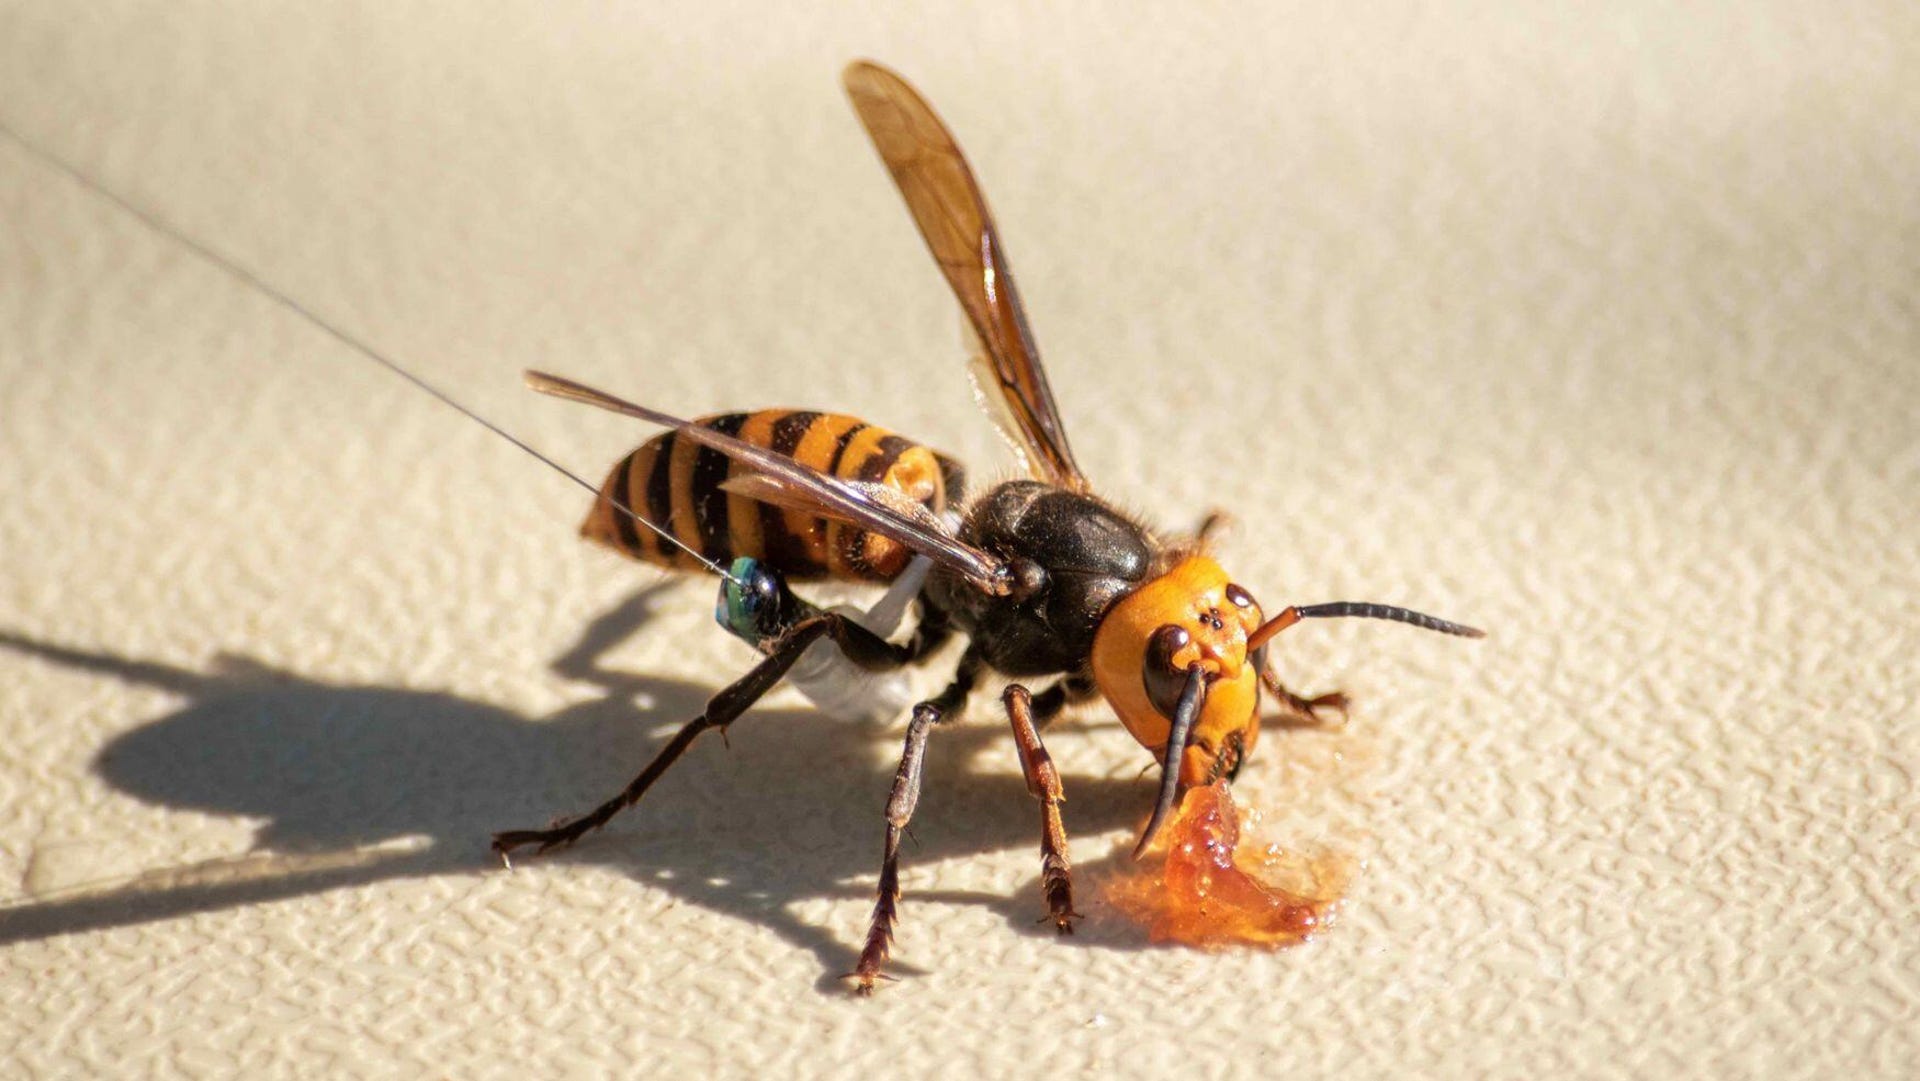 Murder hornet with a tracker attached to it.